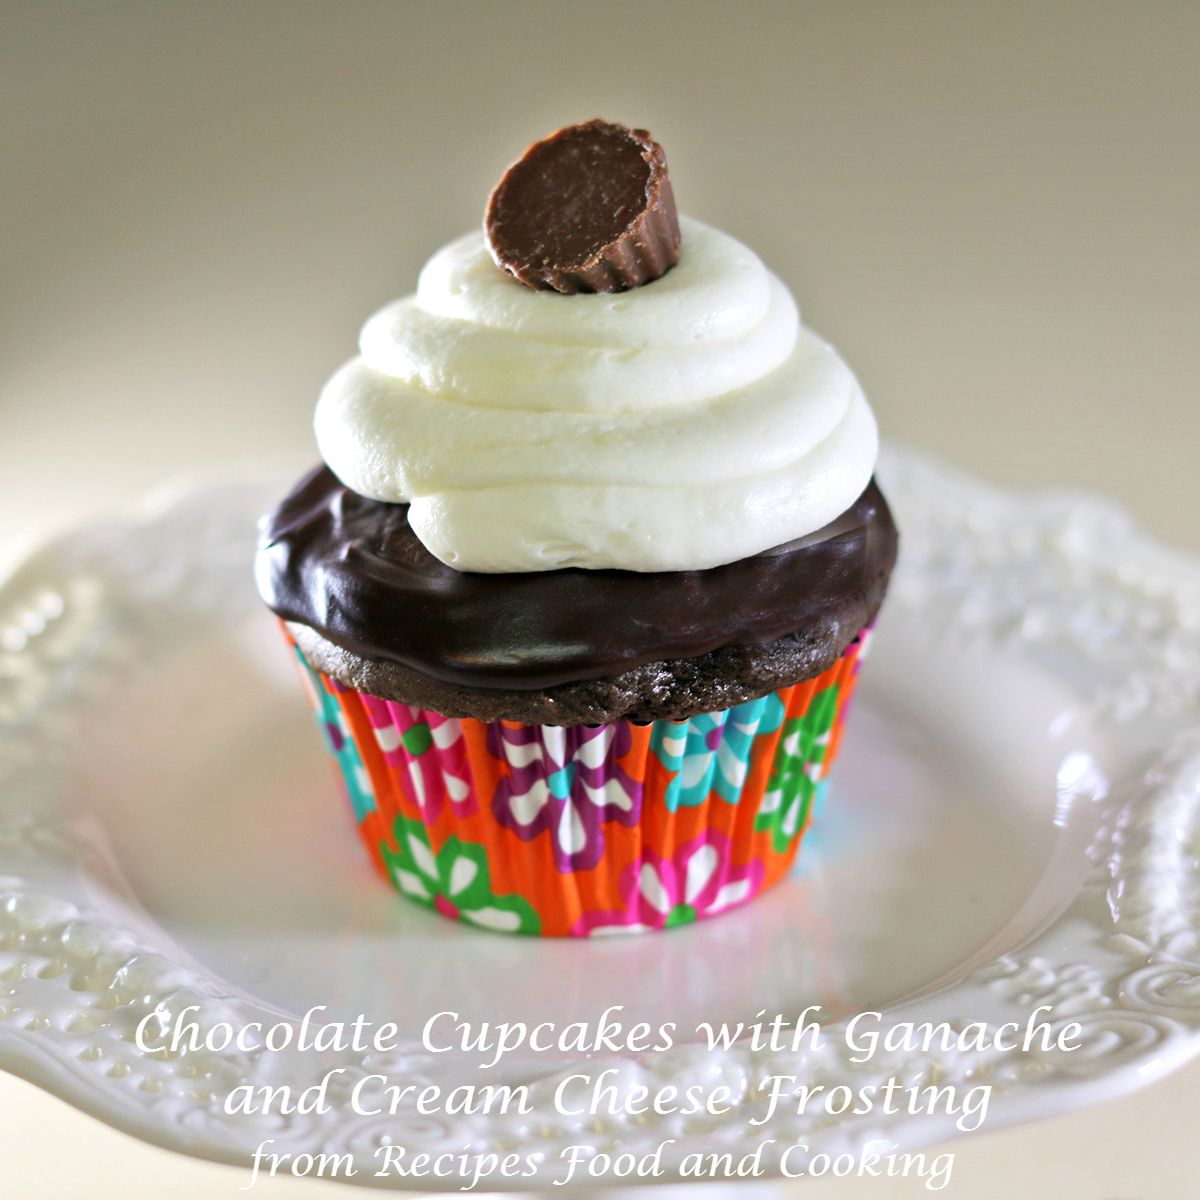 Chocolate Cupcakes with Ganache and Cream Cheese Frosting